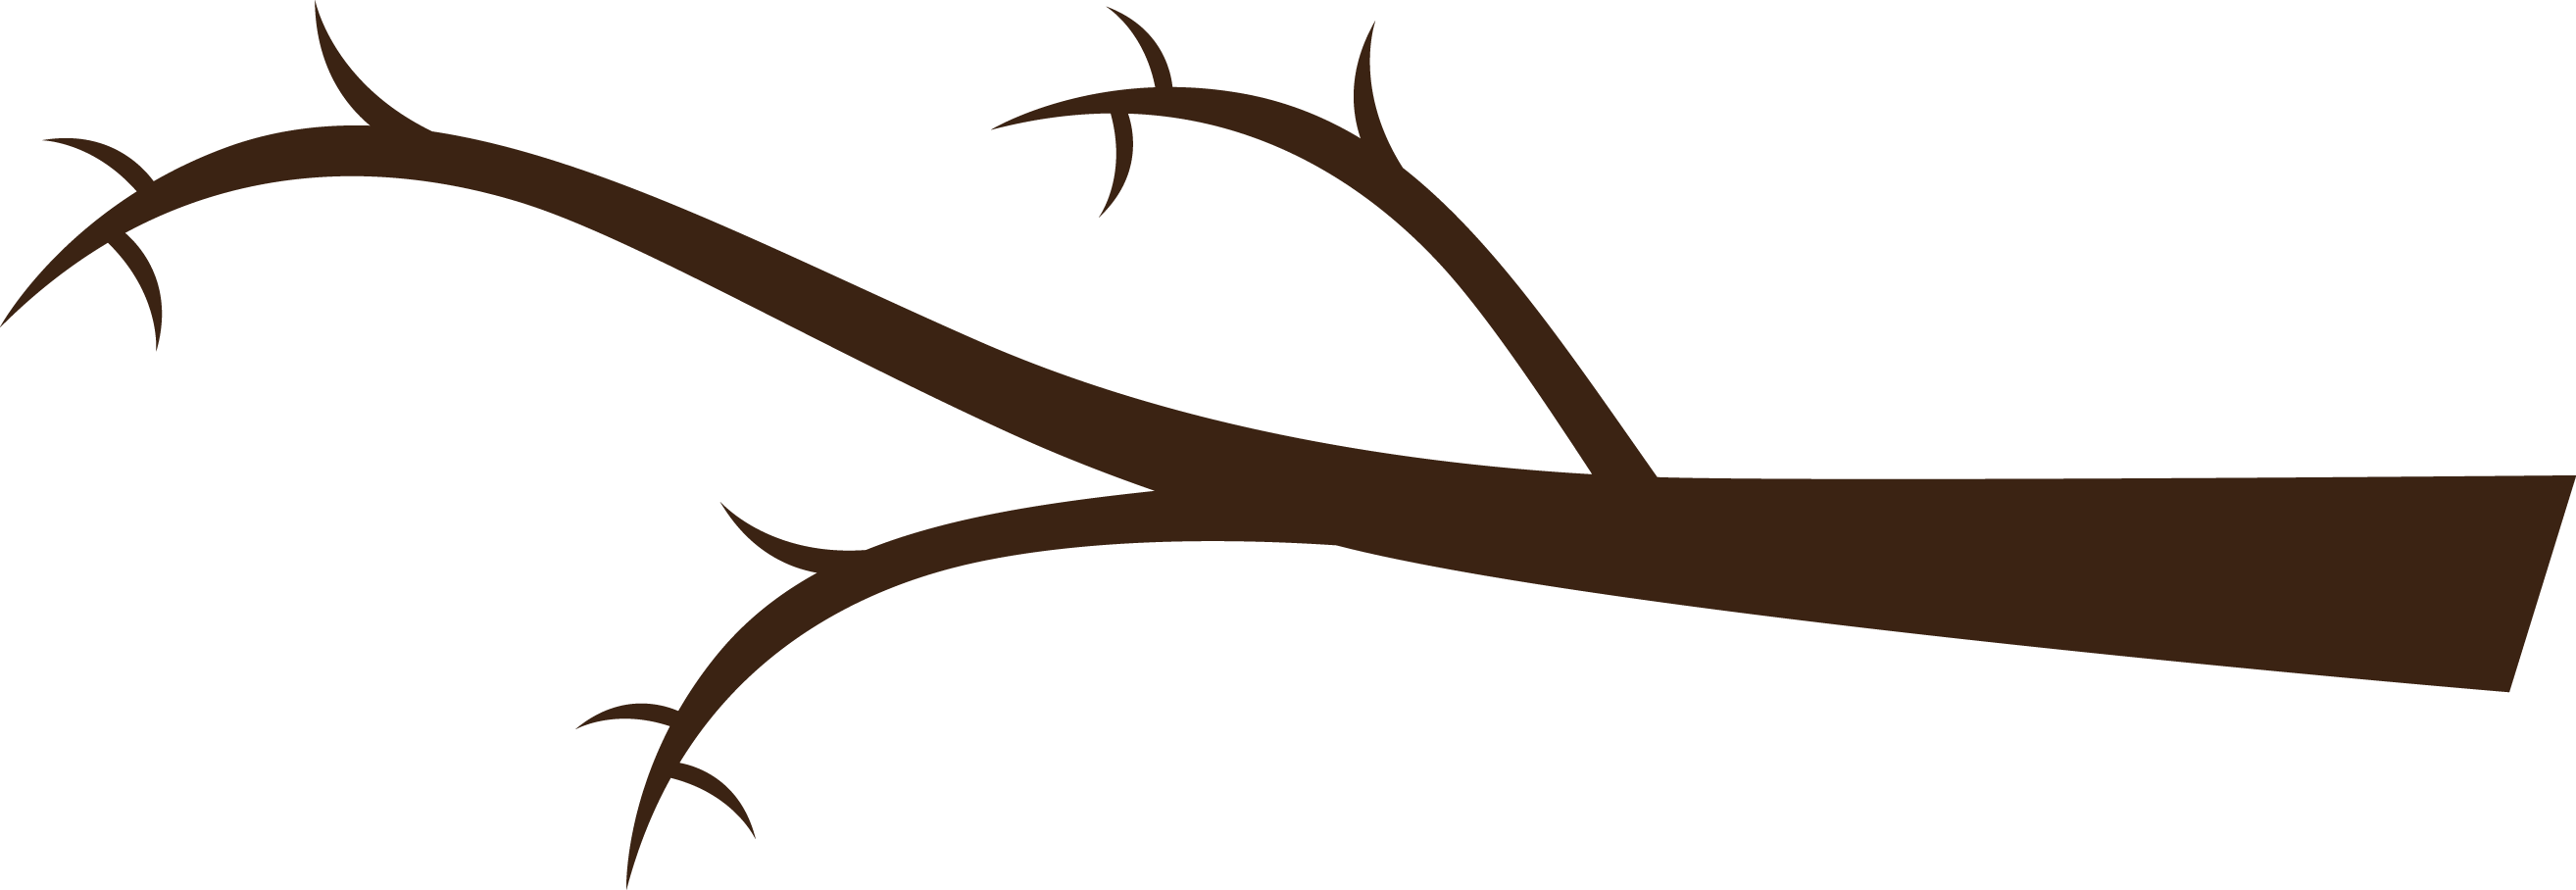 Tree Branch Png 